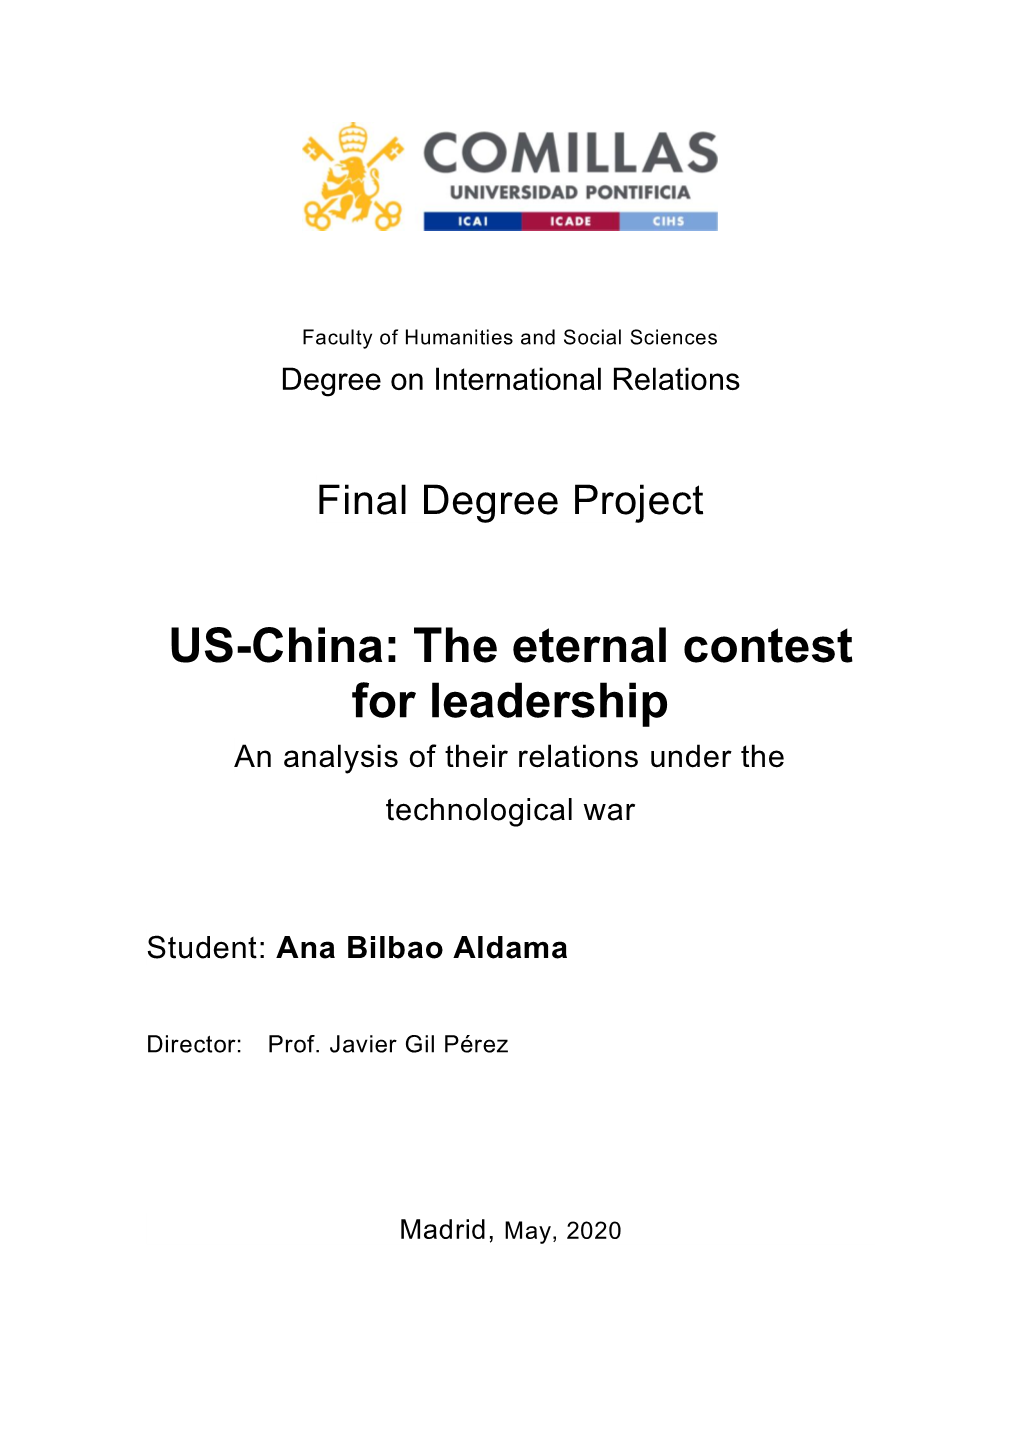 US-China: the Eternal Contest for Leadership an Analysis of Their Relations Under the Technological War